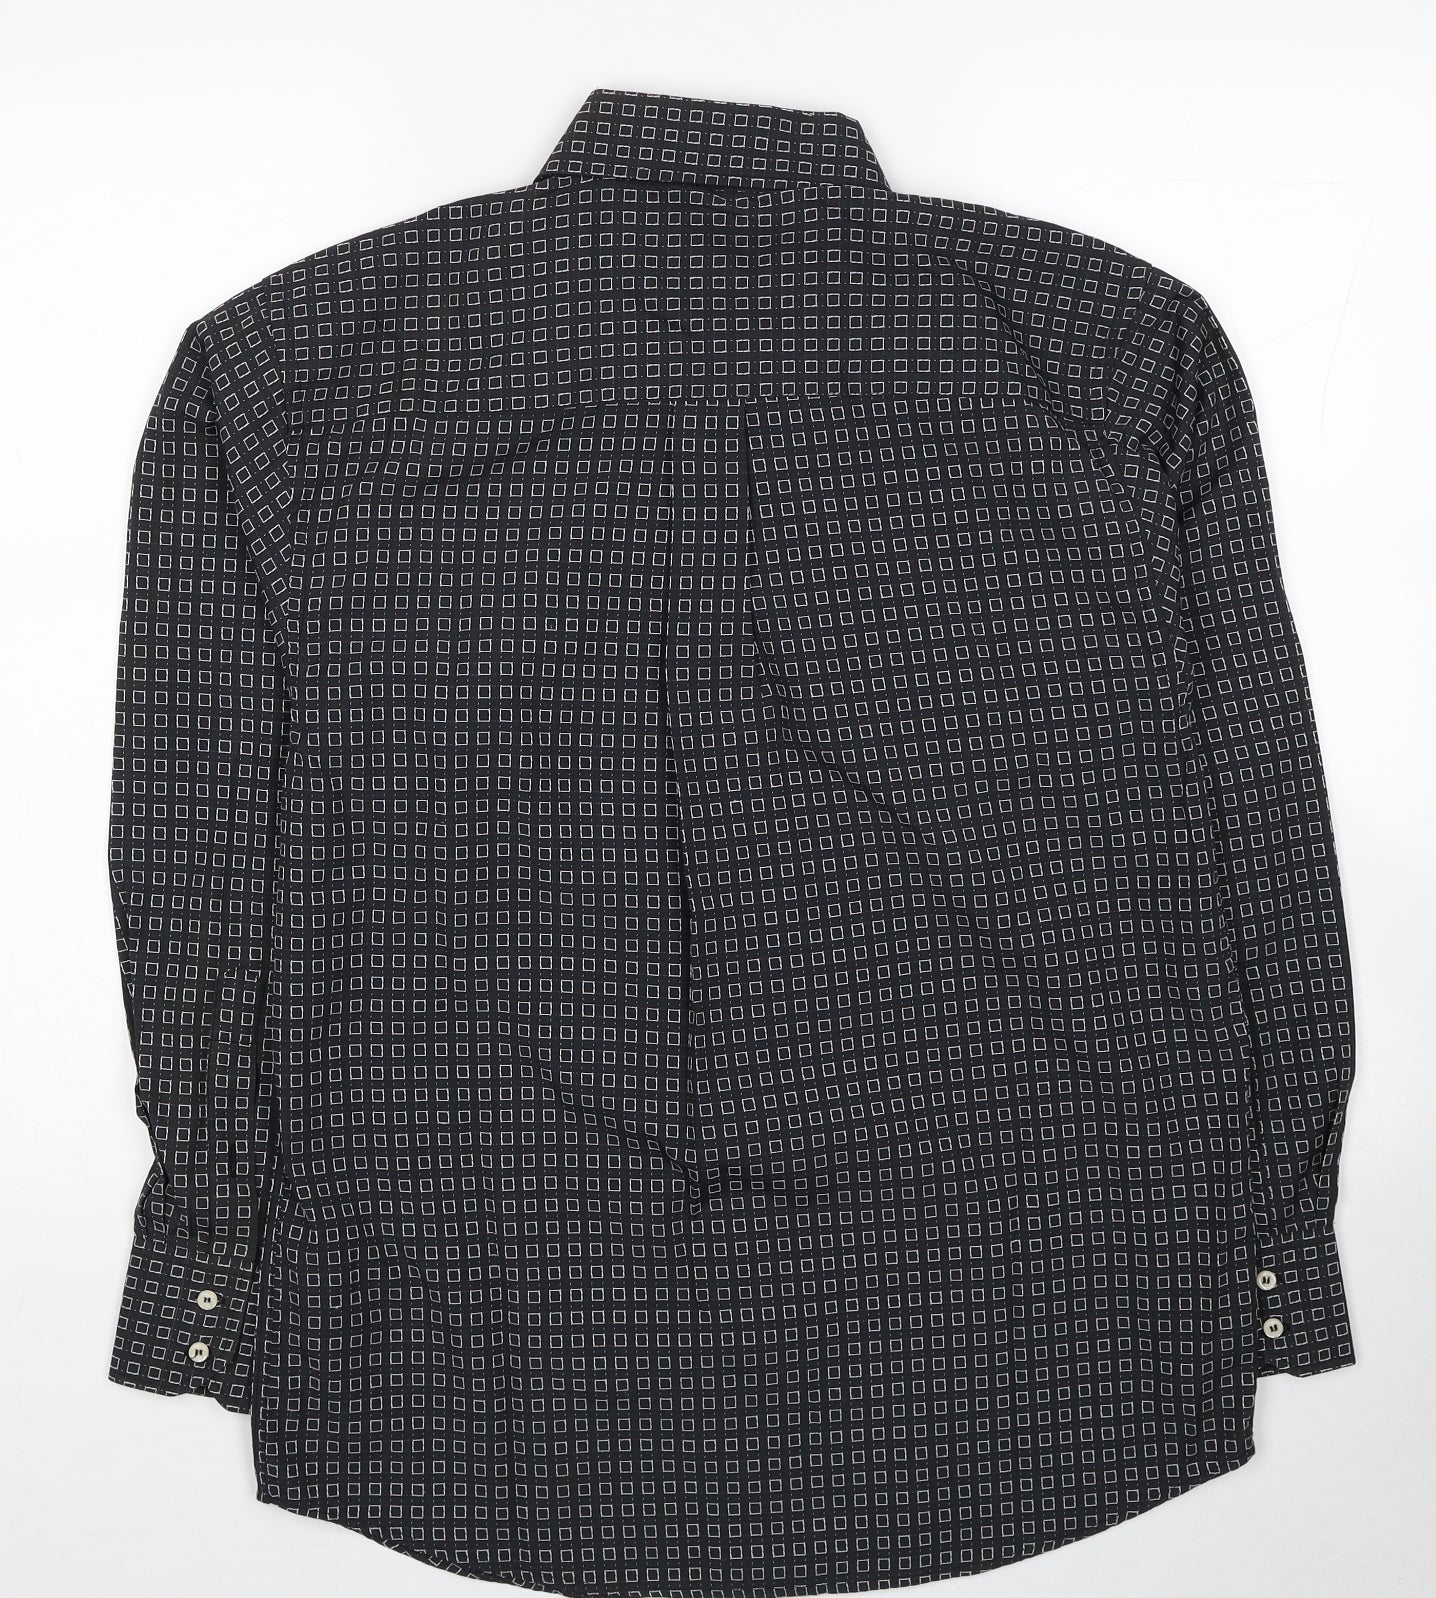 Refind Mens Black Geometric Polyester Dress Shirt Size S Collared Button